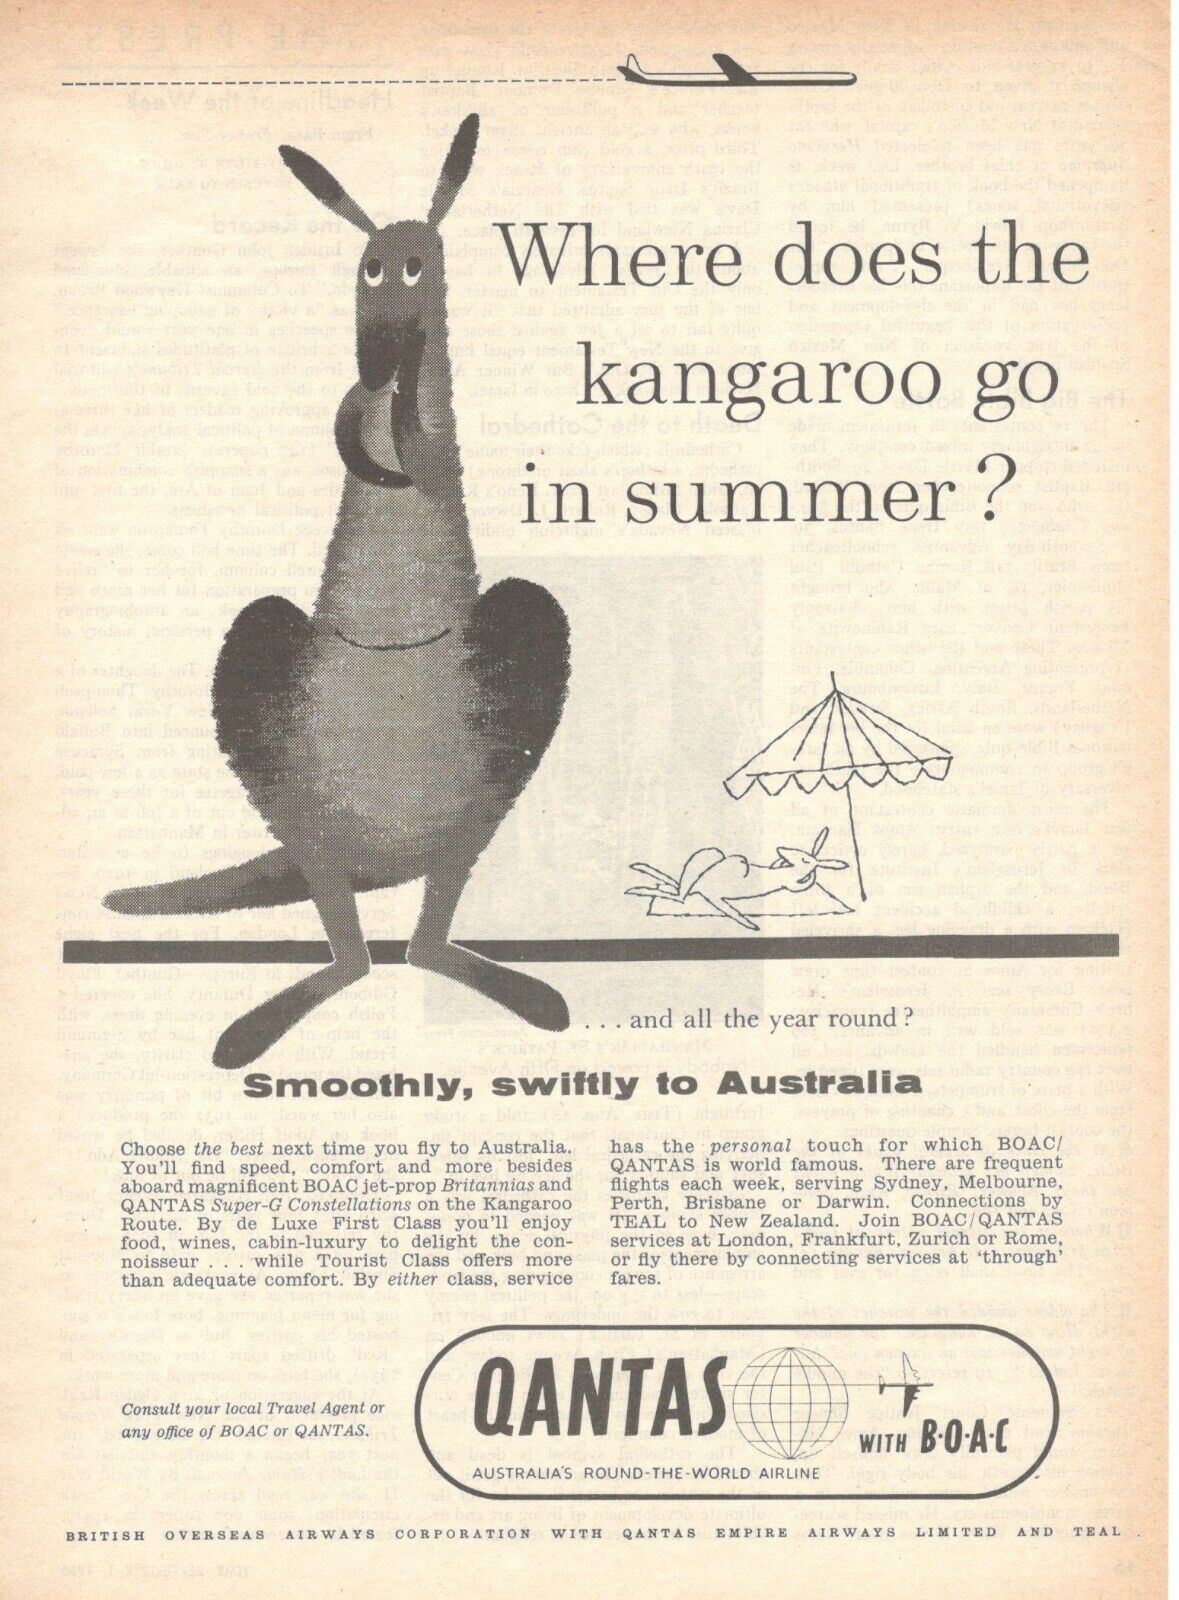 Qantas Airways Australians With Boac Advertising 1 Page 1958 Smoothly Swiftly